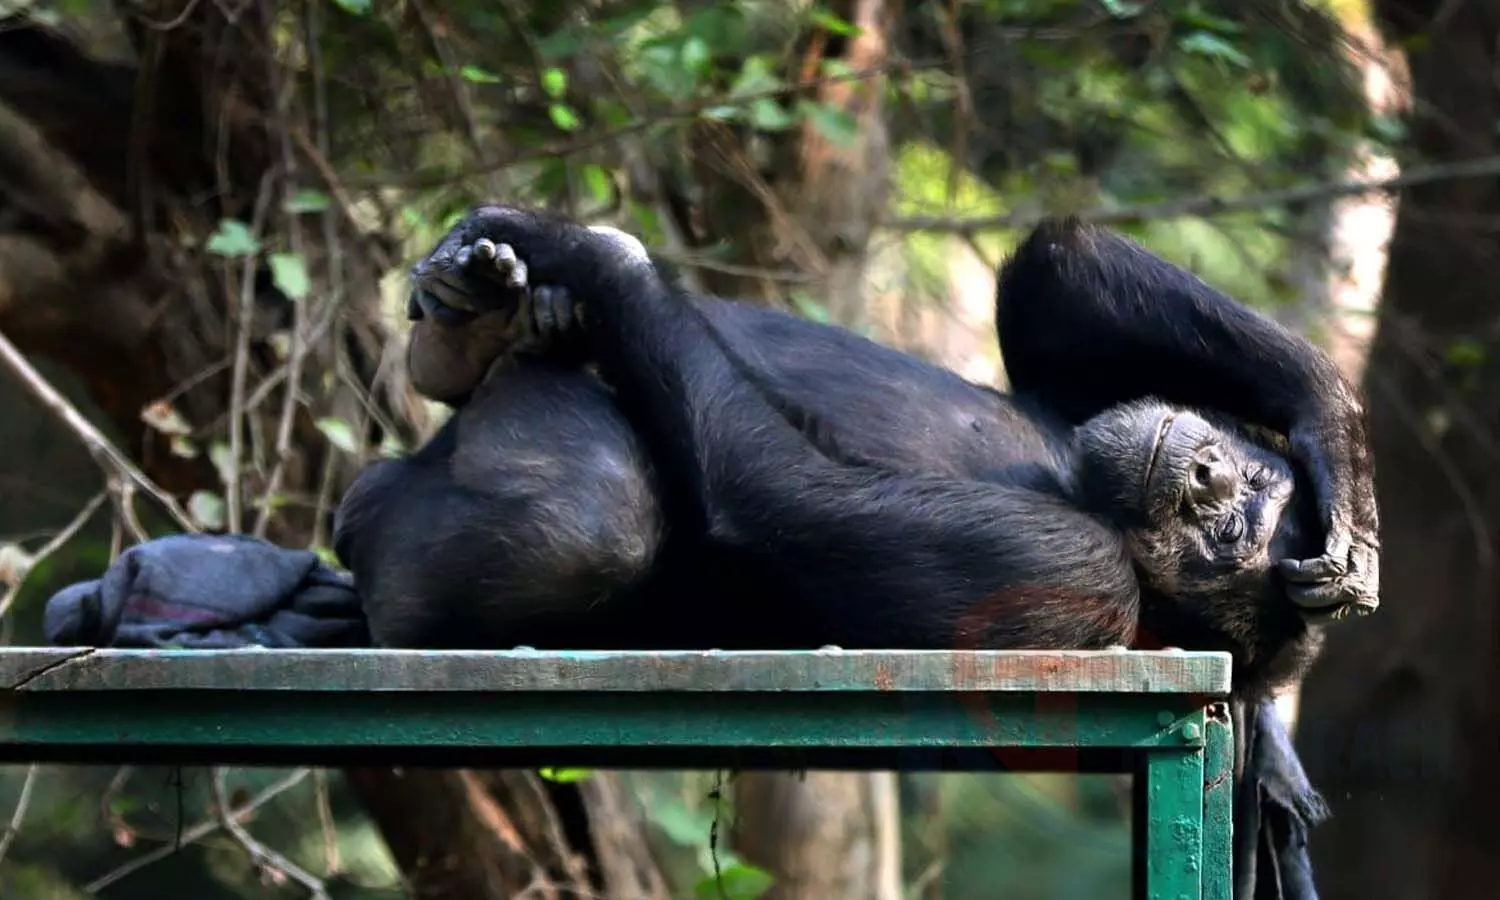 Their own ways to escape the cold: Chimpanzees resort to warm sunlight to escape the cold, room heater for snakes